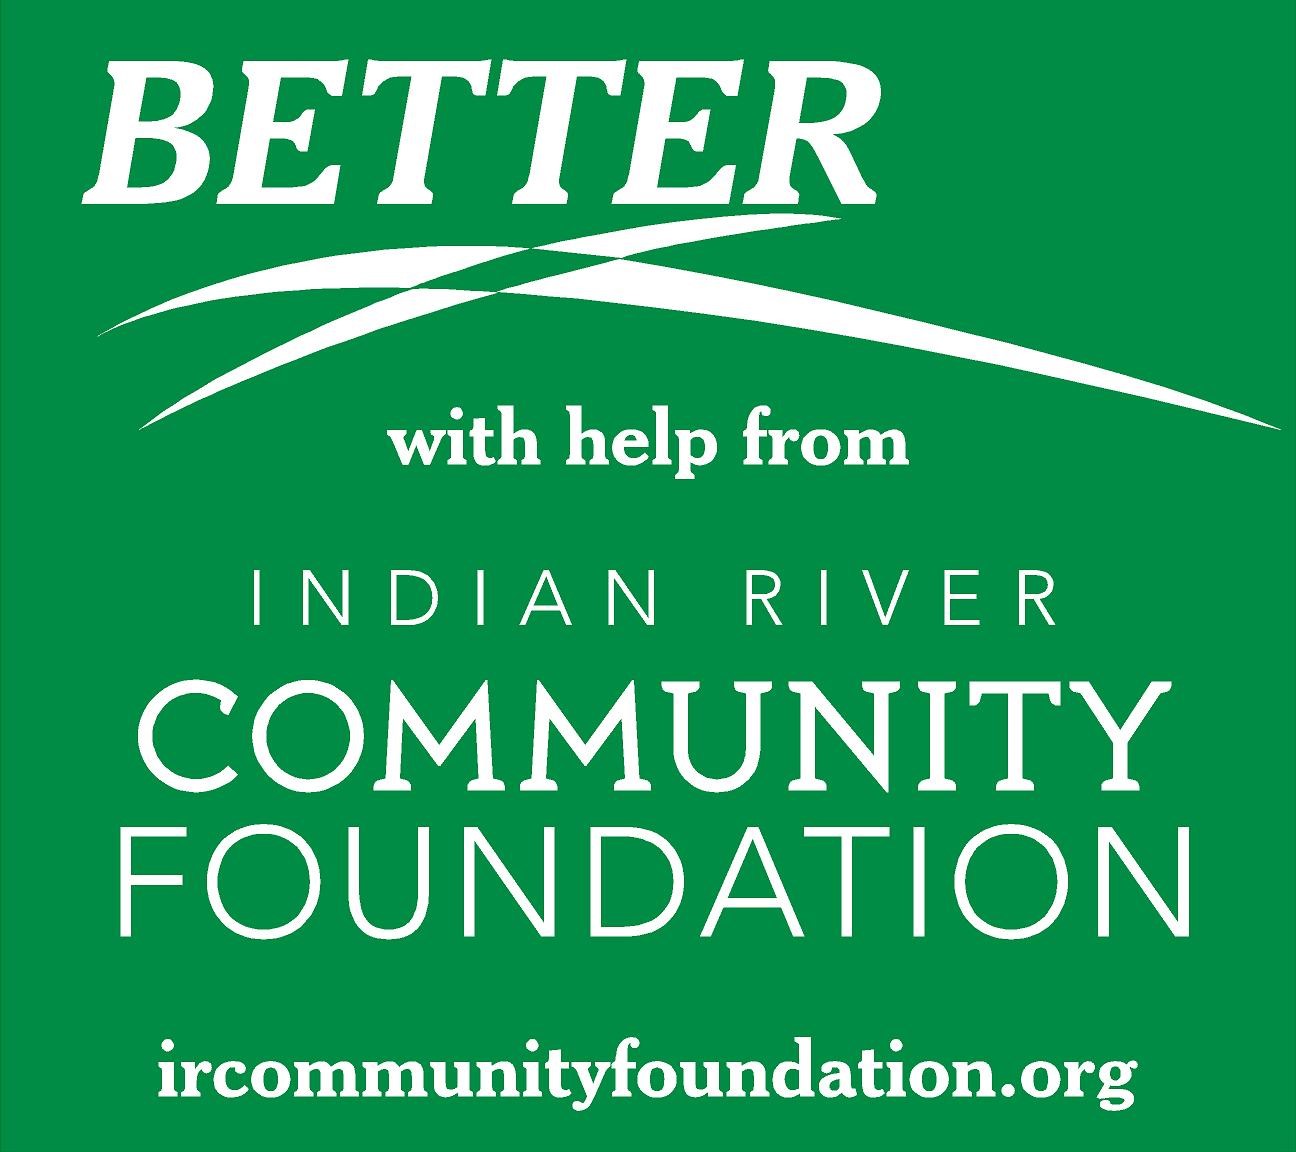 Community Foundation Awards Ten Grants Totaling $425,000 to Local Charities